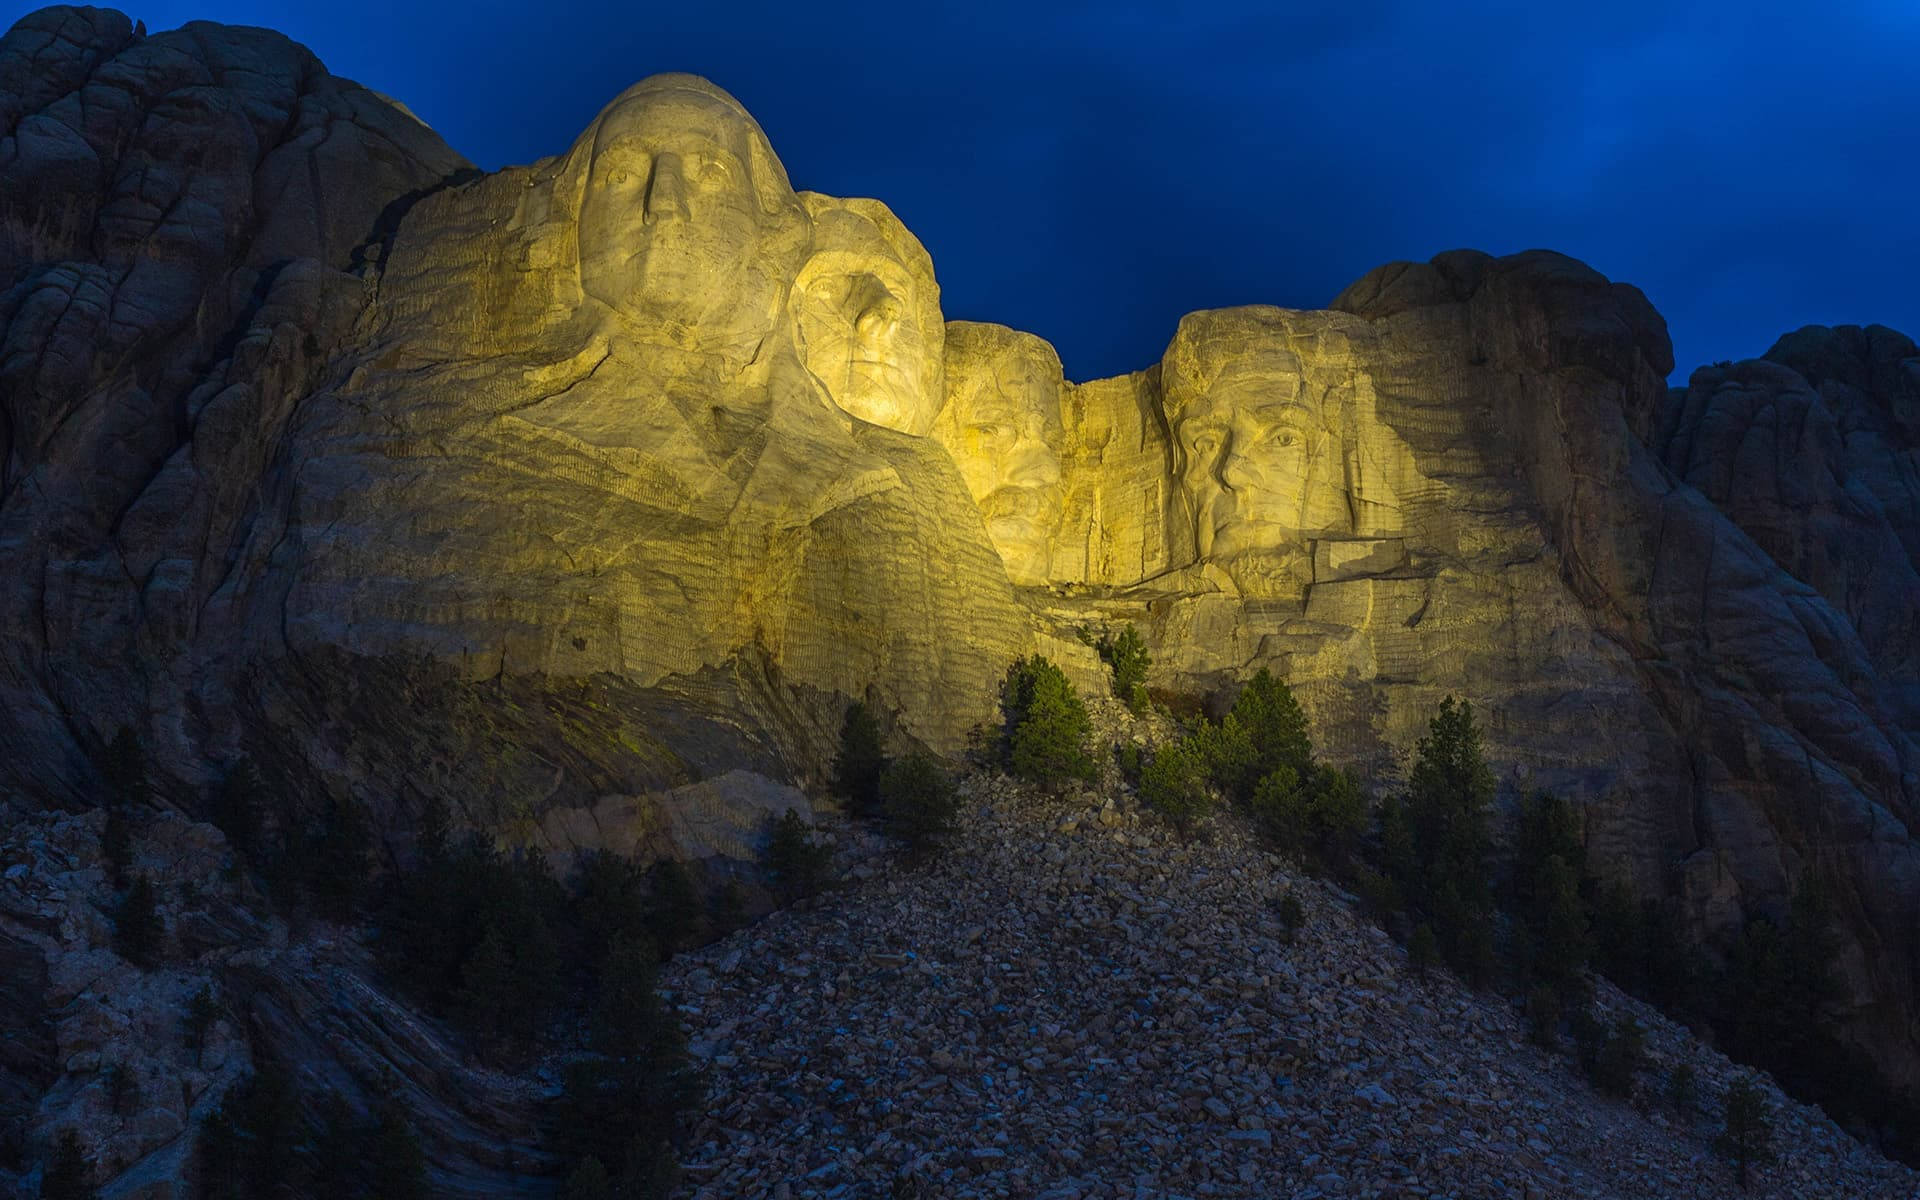 The Light Of Mount Rushmore At Night Wallpaper